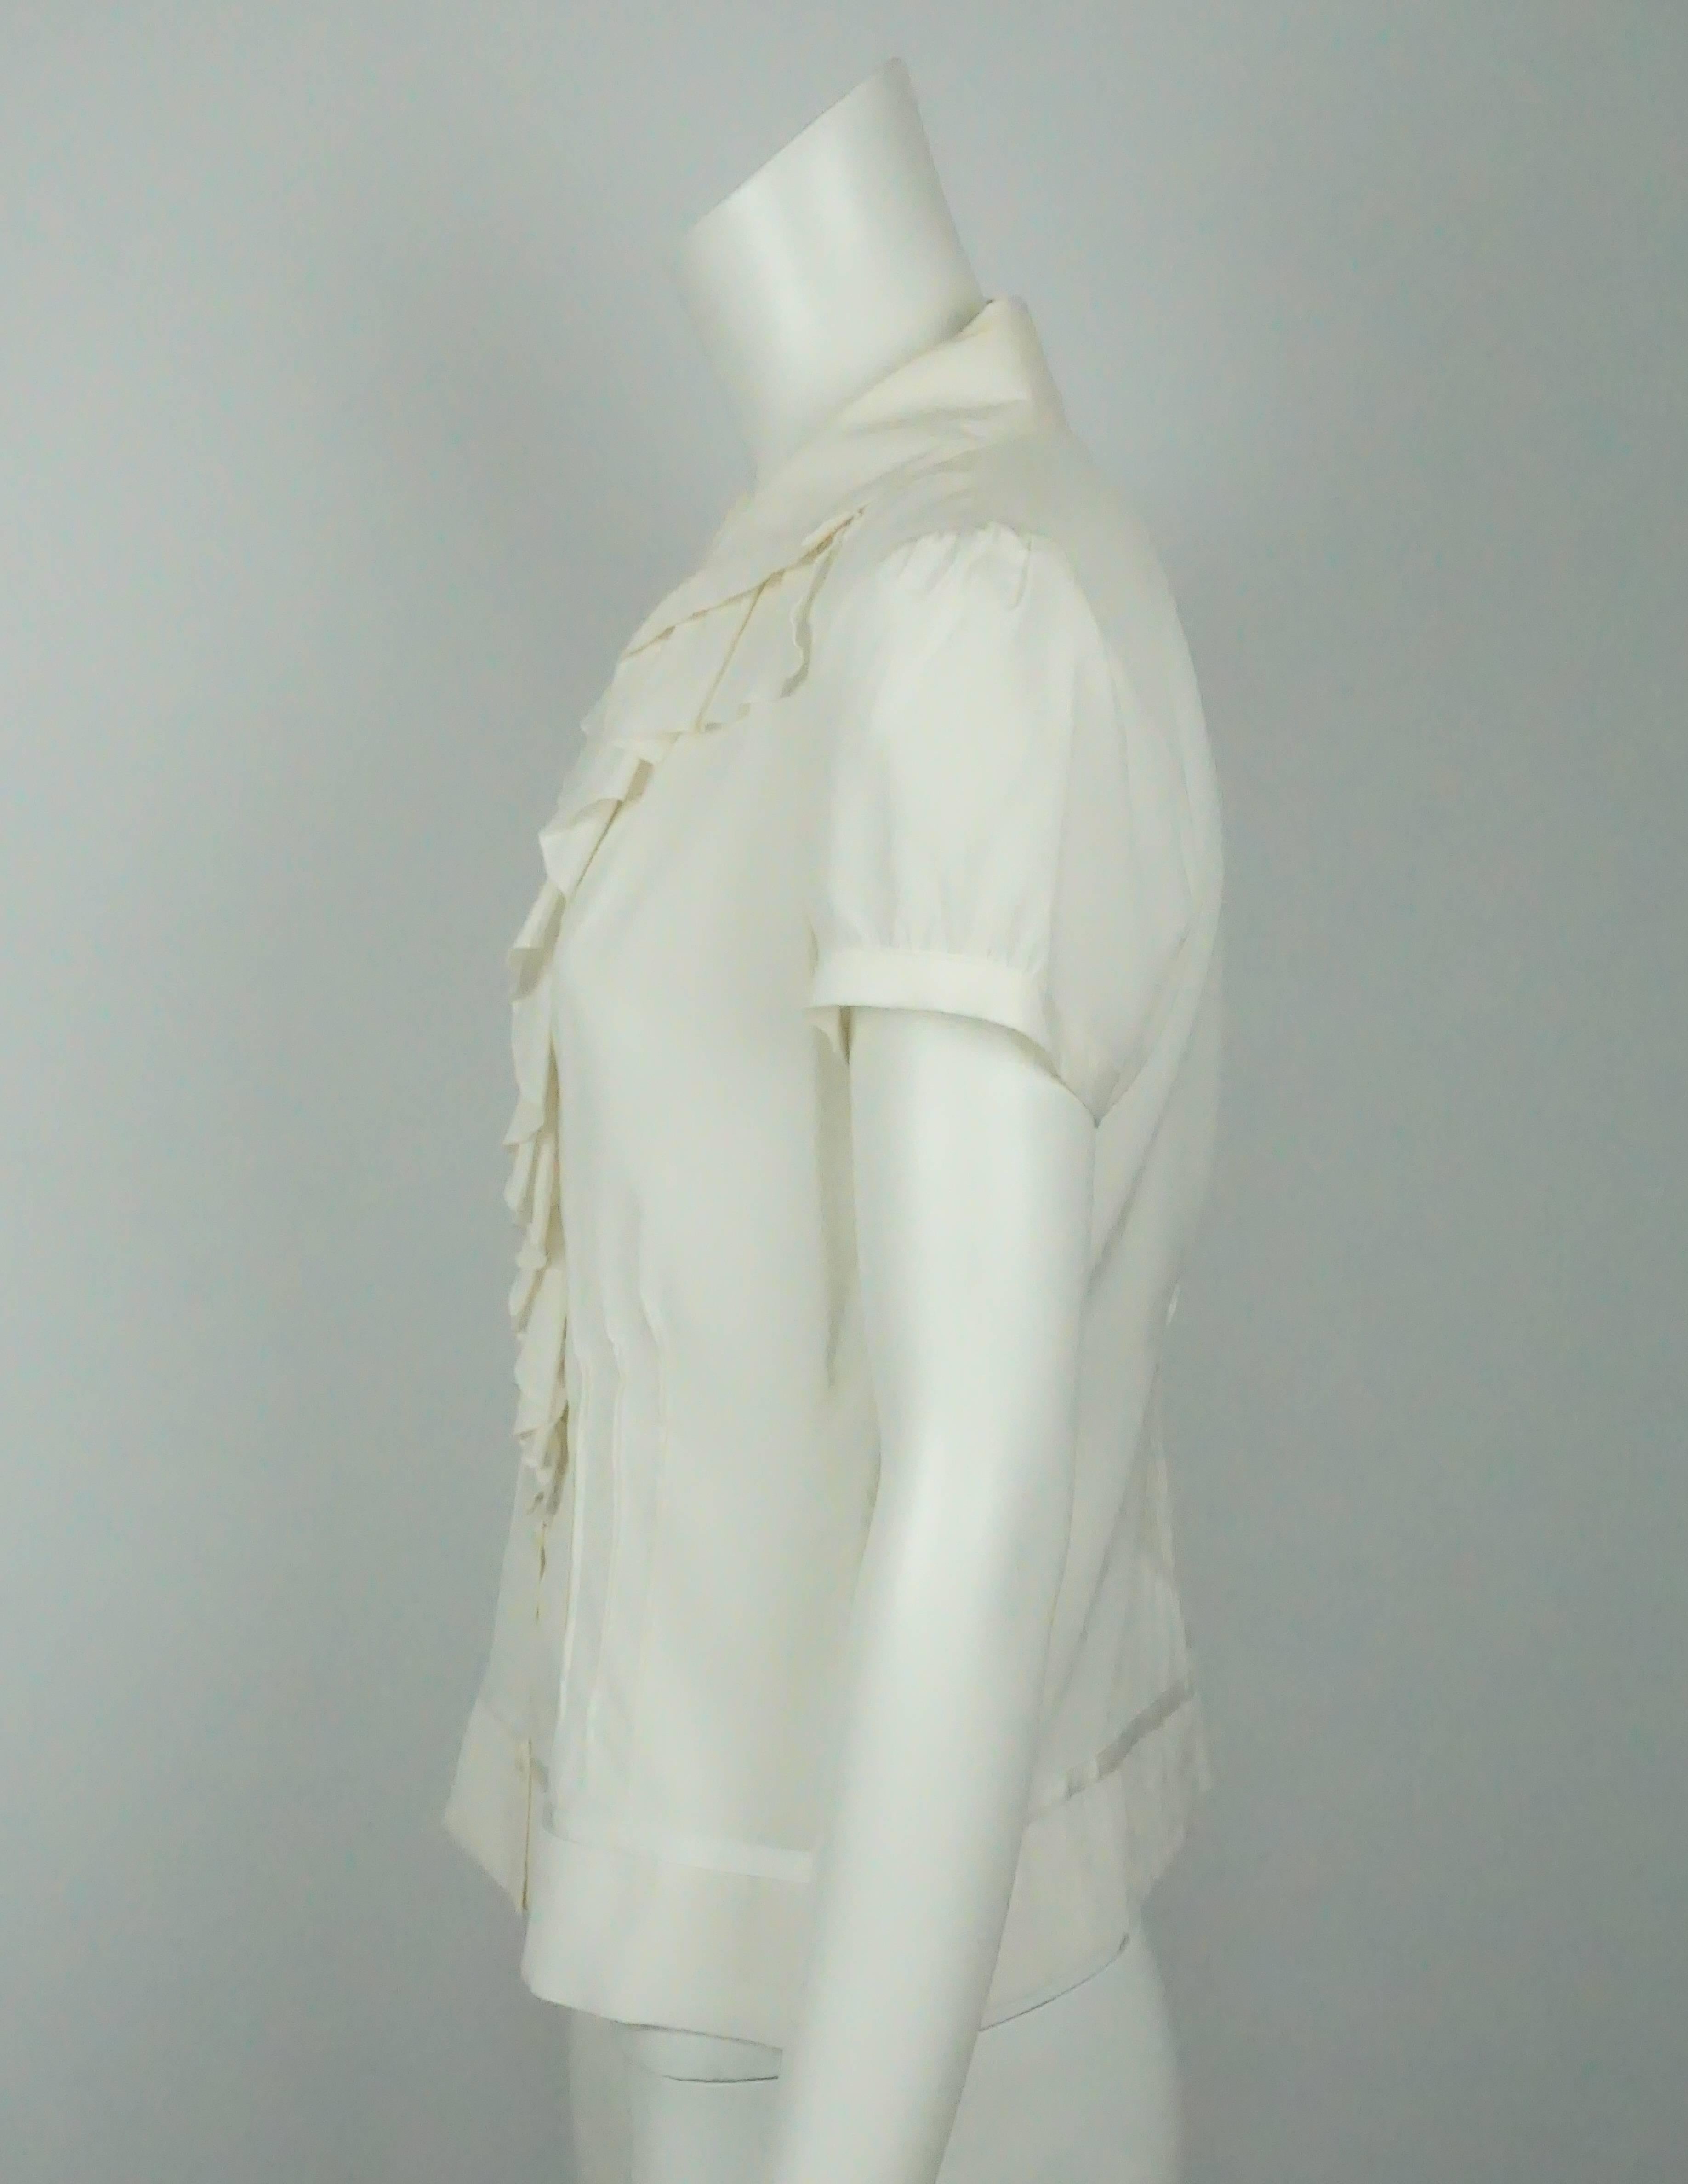 Giorgio Armani Ivory Silk S/S w/ Ruffles Top - NWT - 8  This classic silk top is in excellent condition. The front of the top has a ruffle detail that starts from under the collar and goes almost all the way down to the bottom of the top. There are